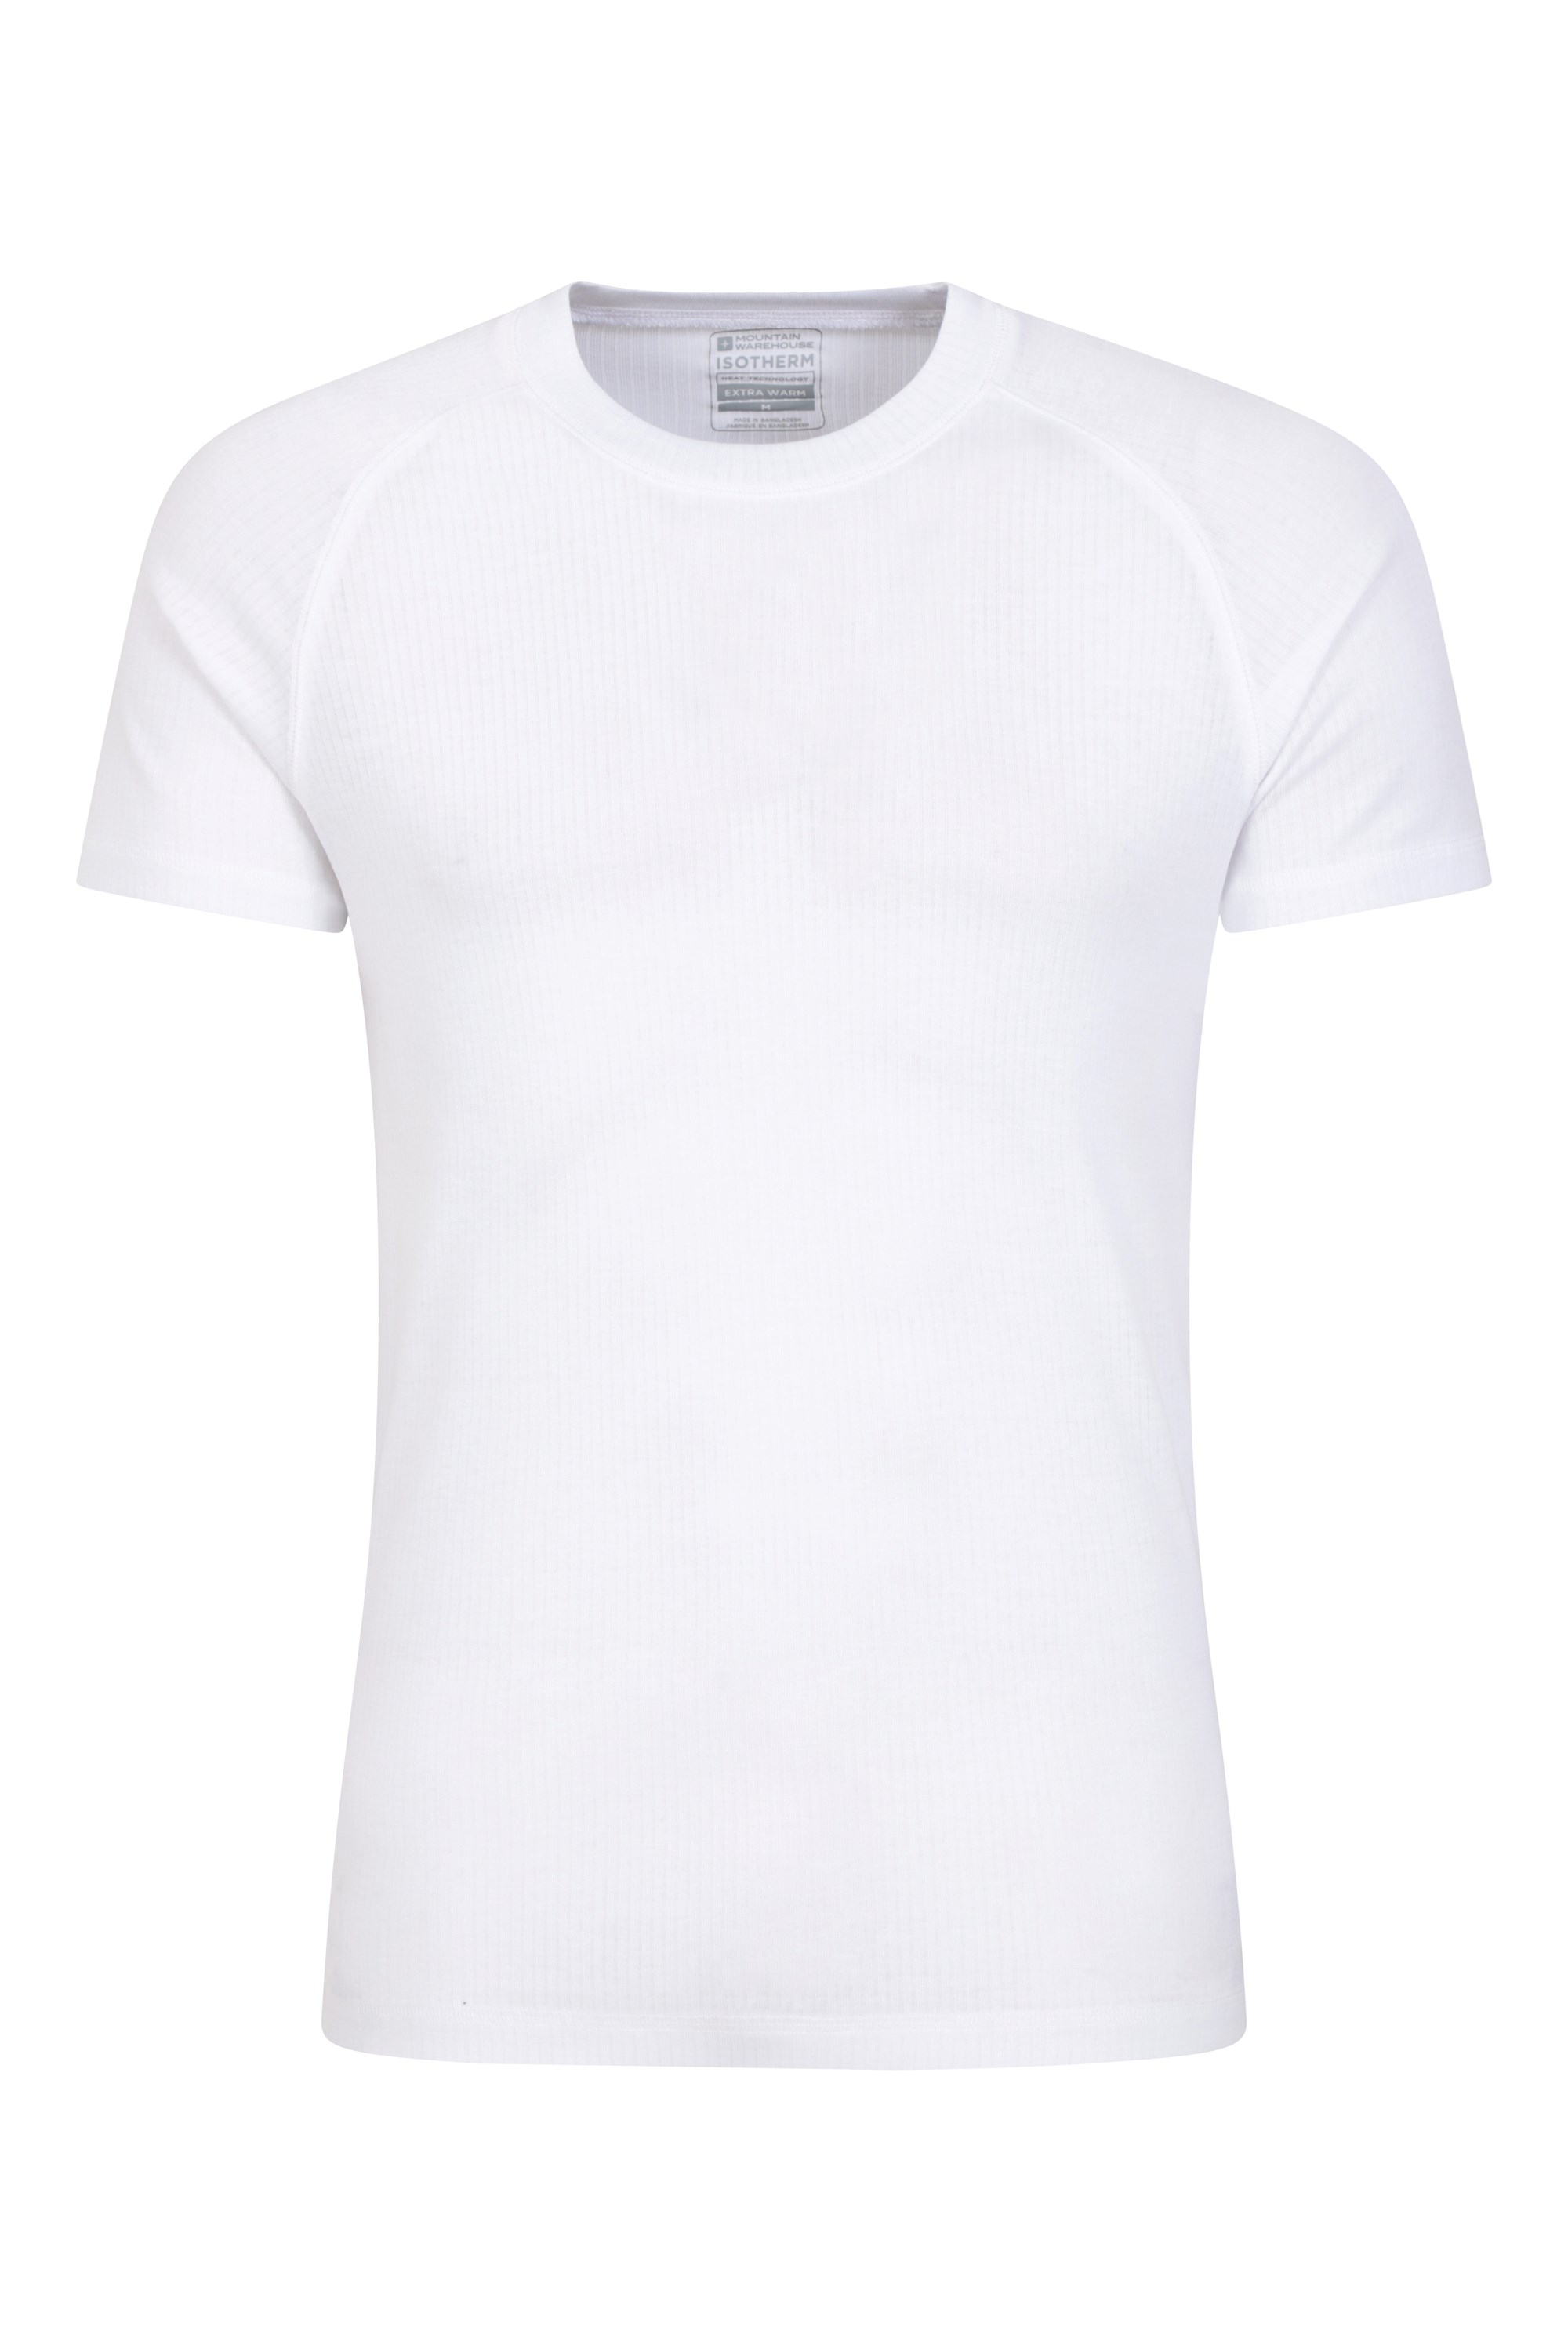 Talus Mens Short Sleeved Round Neck Top - White